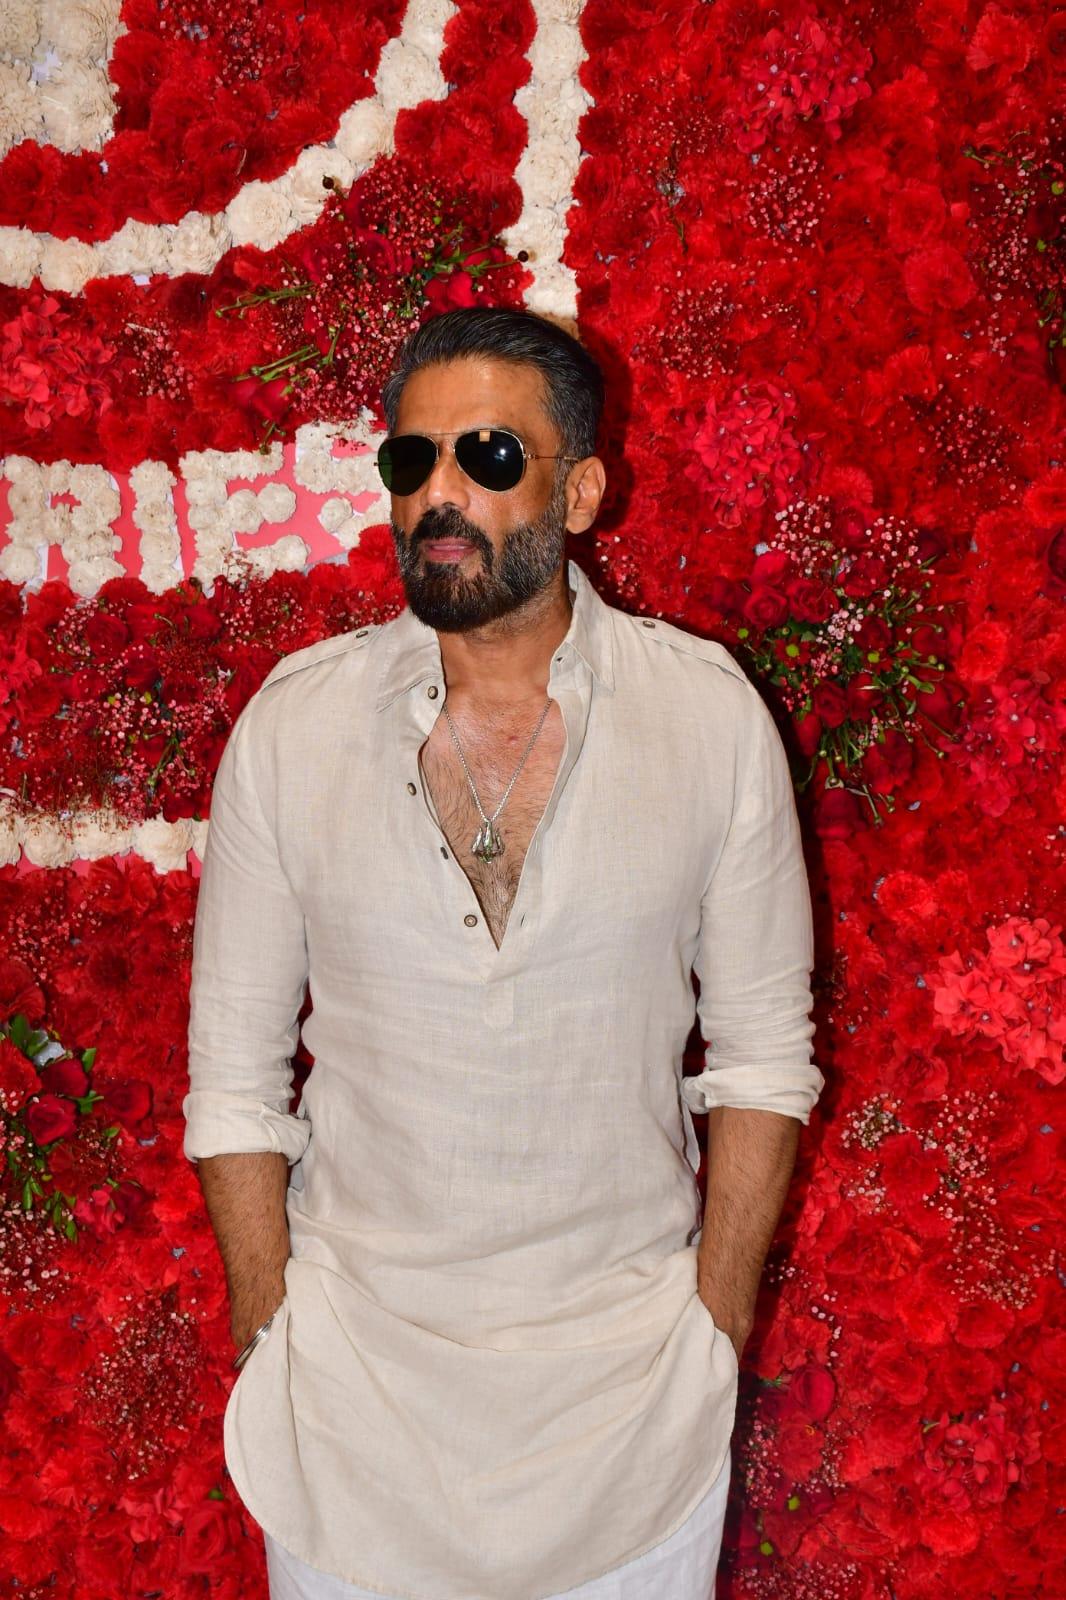 Anna Suniel Shetty looked handsome as he visited T-series for Ganpati darshan